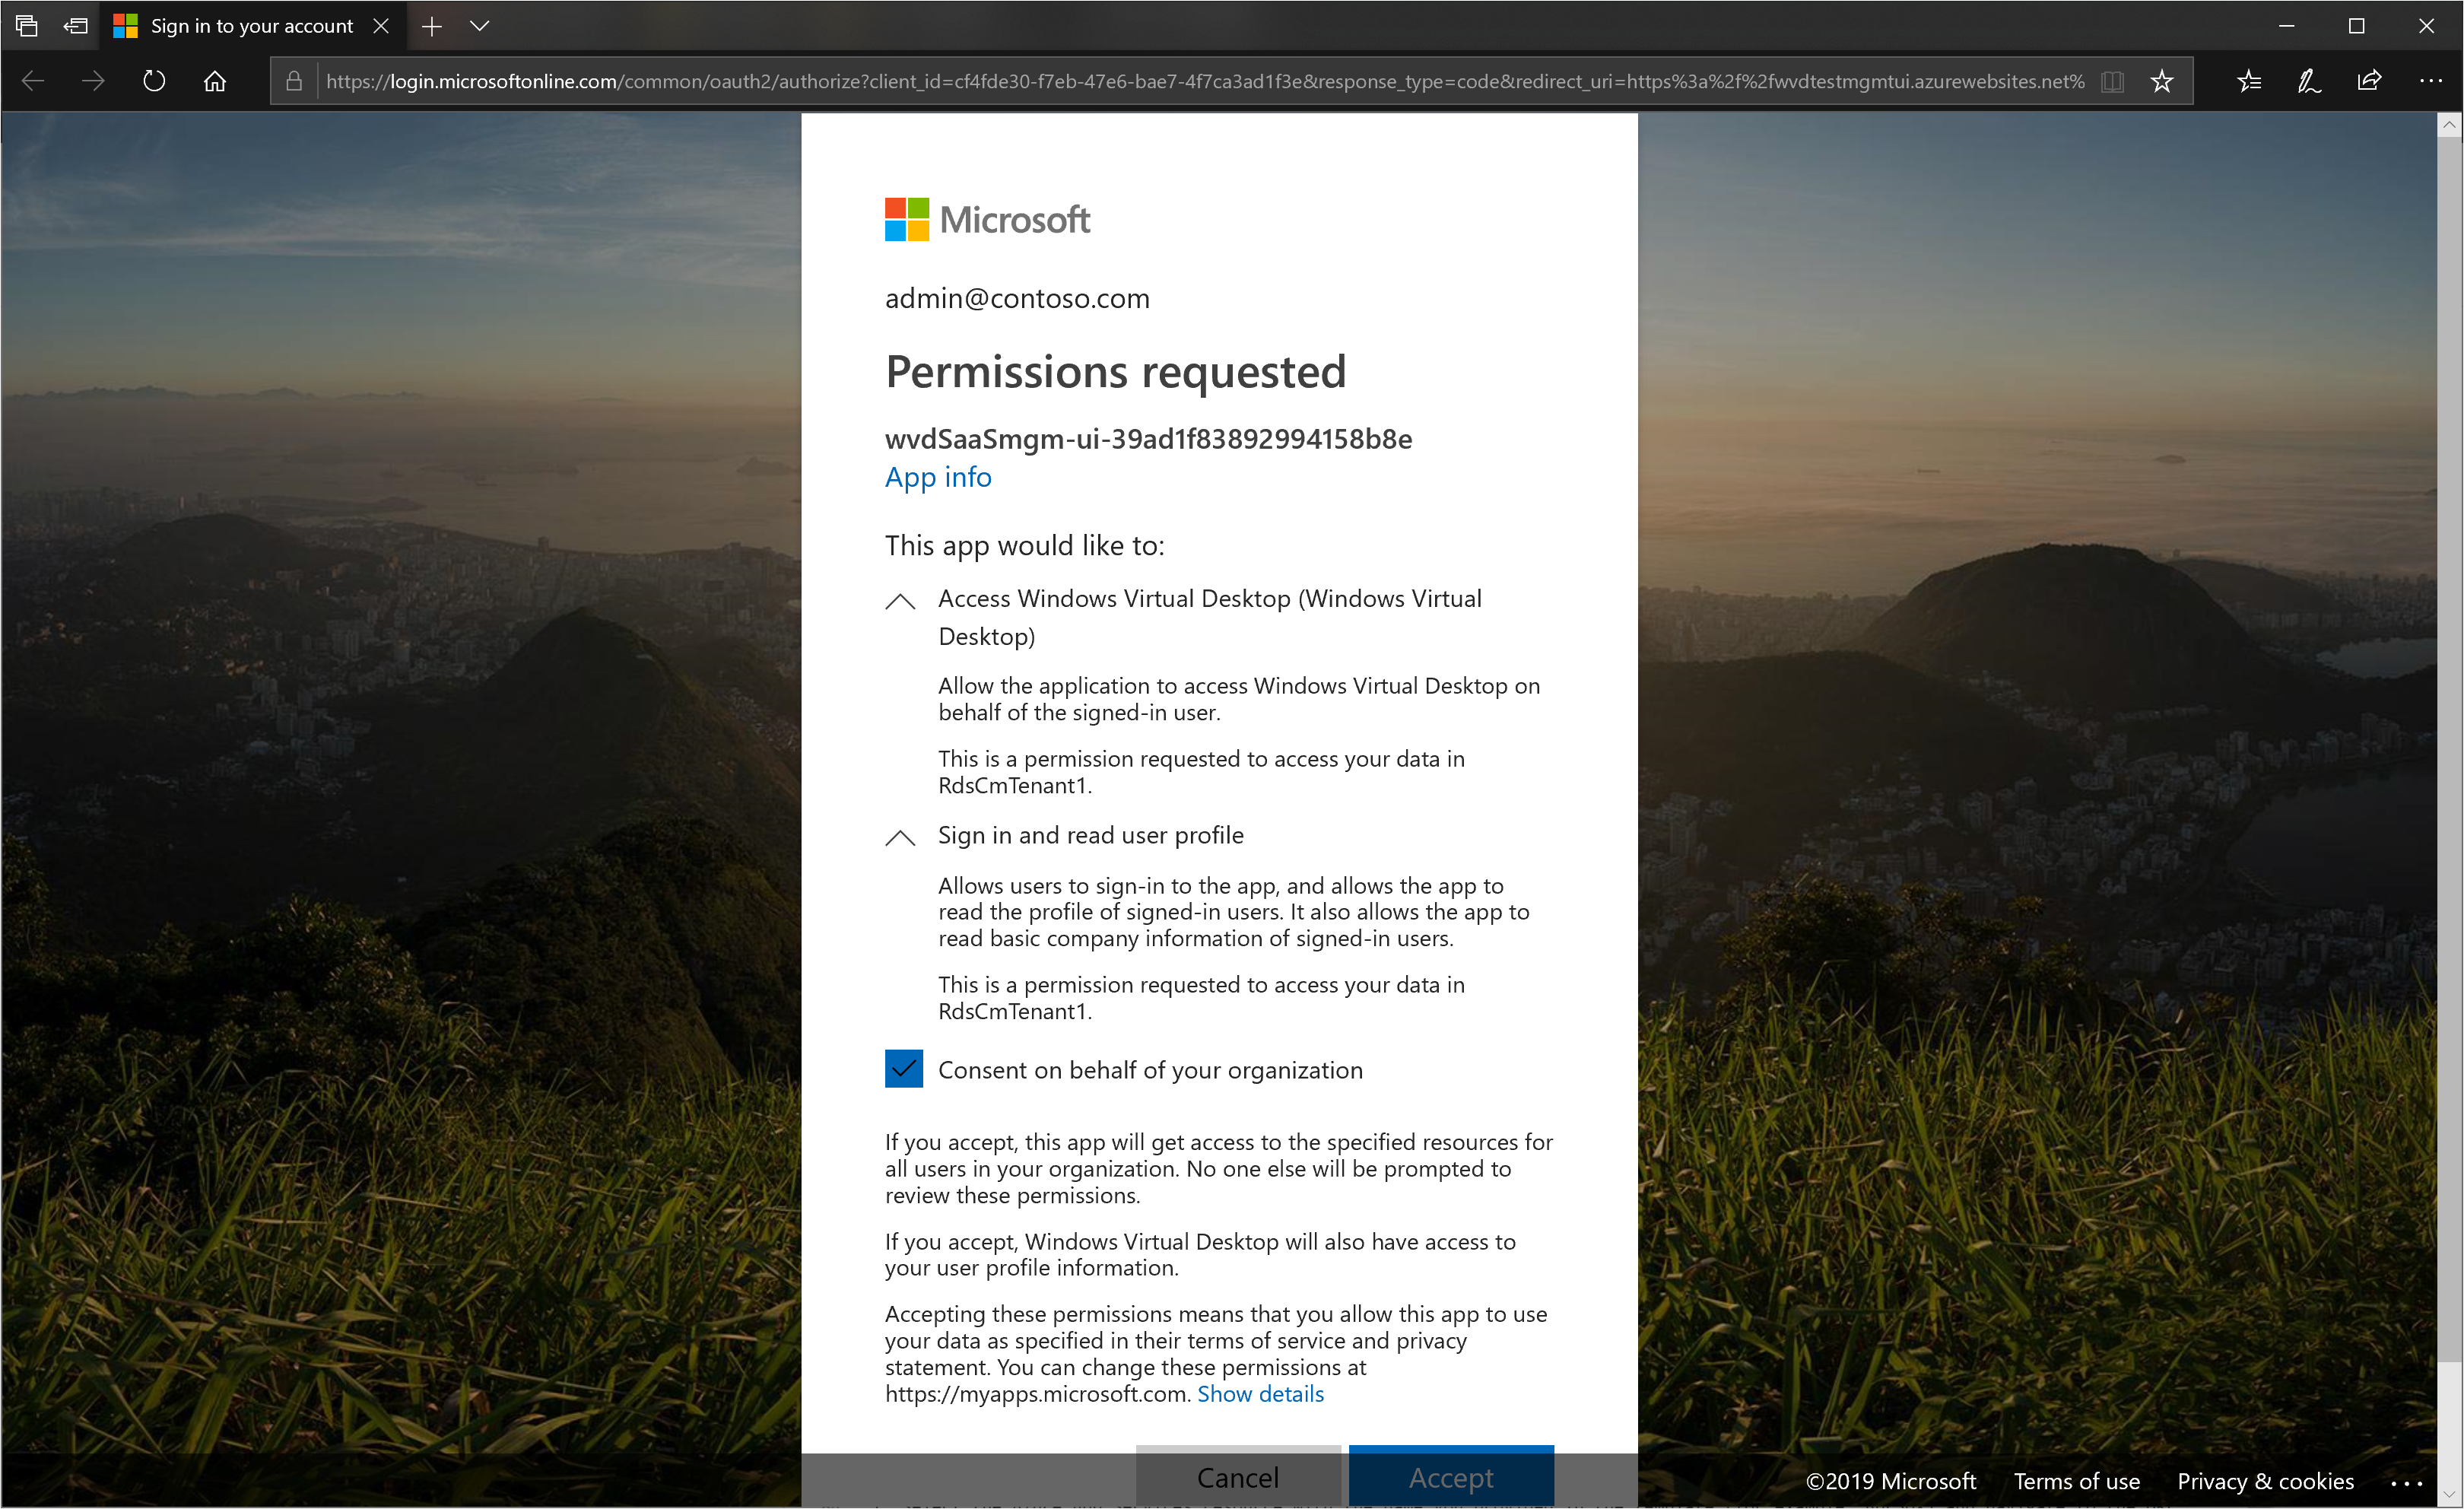 A screenshot showing the full consent page that the user or admin will see.